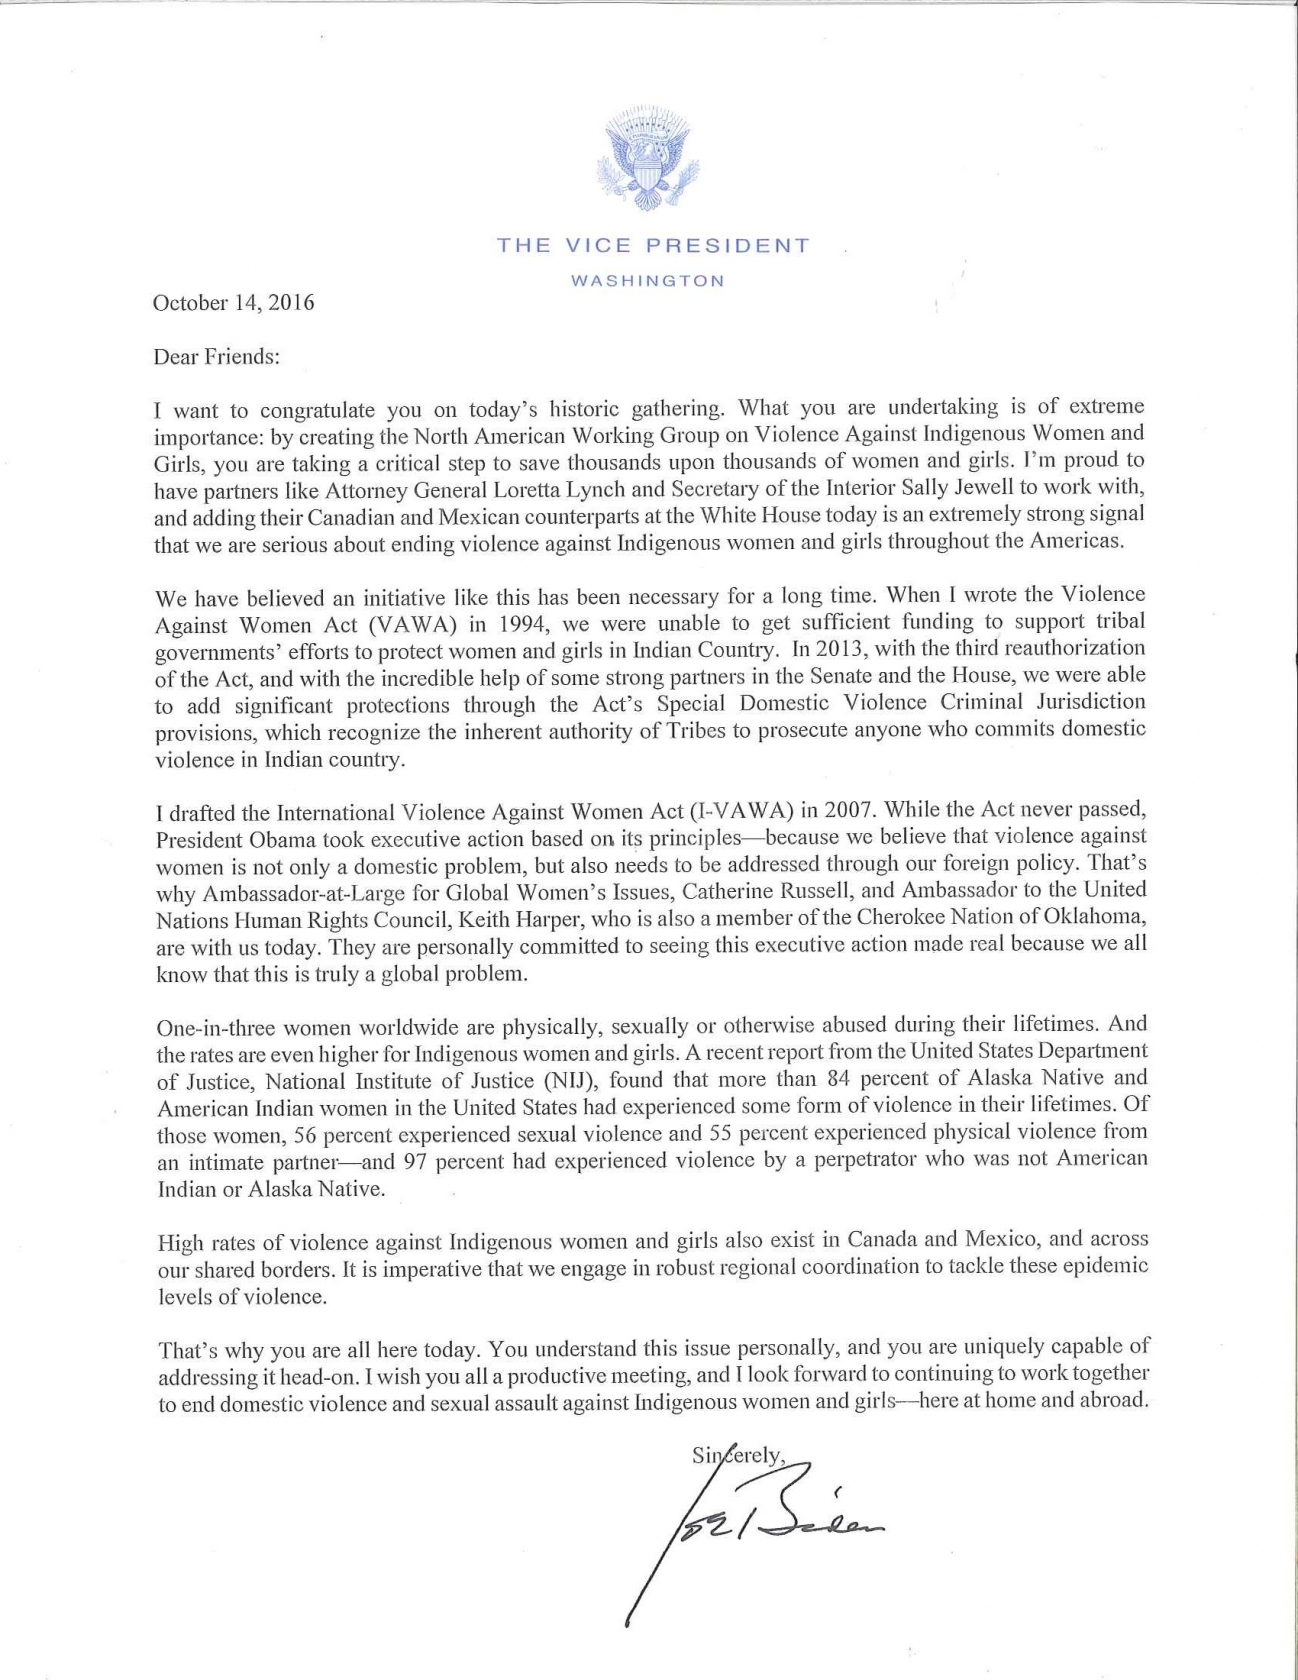 A letter from Vice President Biden to the first meeting of the North American Working Group on Violence against Indigenous Women and Girls. 